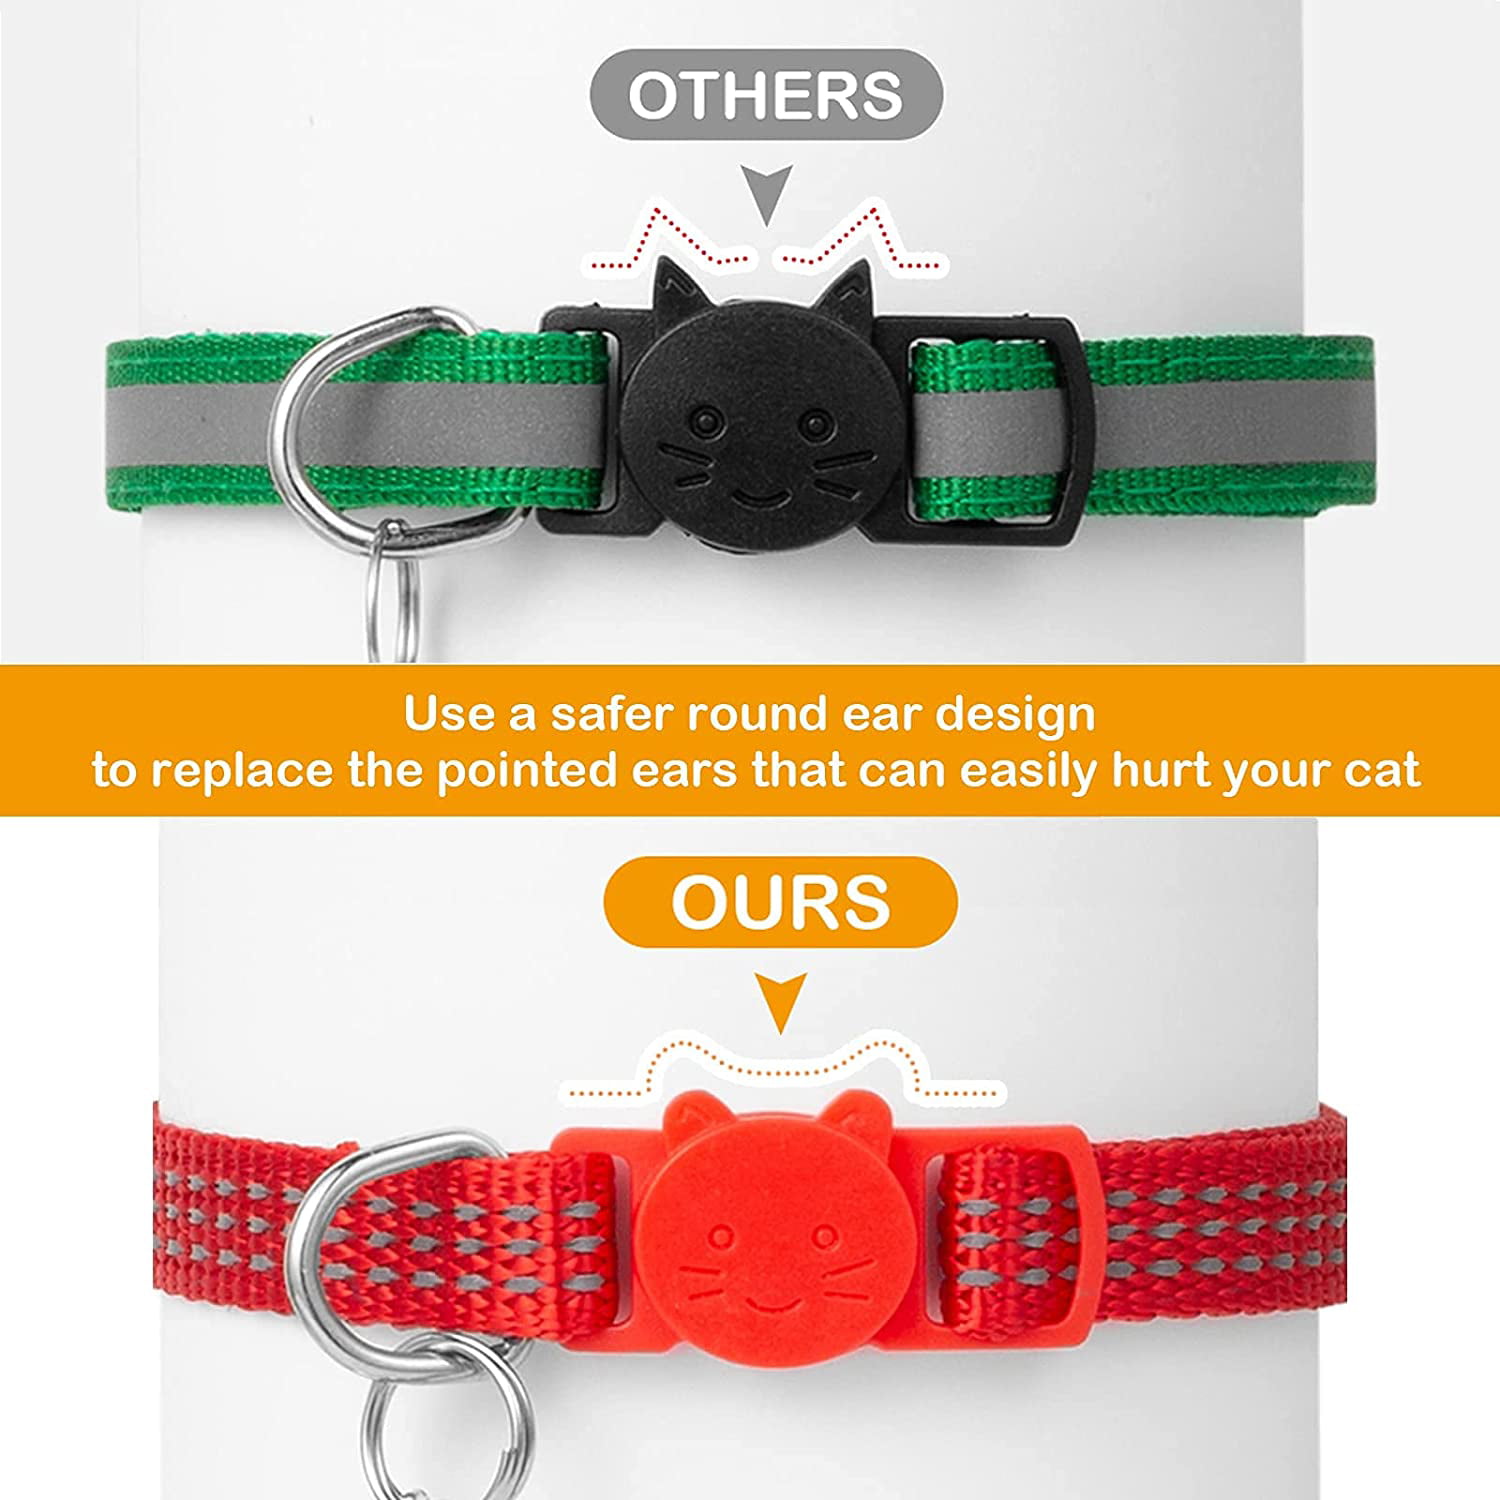 Litvibes Cat collars Set of 3 with bell,Kitten and small dogs soft  adjustable collar safe,solid and protection breakaway for cats and  puppies,cute kitty neckband with Paw print- (Yellow,Dark Green,Light Blue)  Cat Everyday